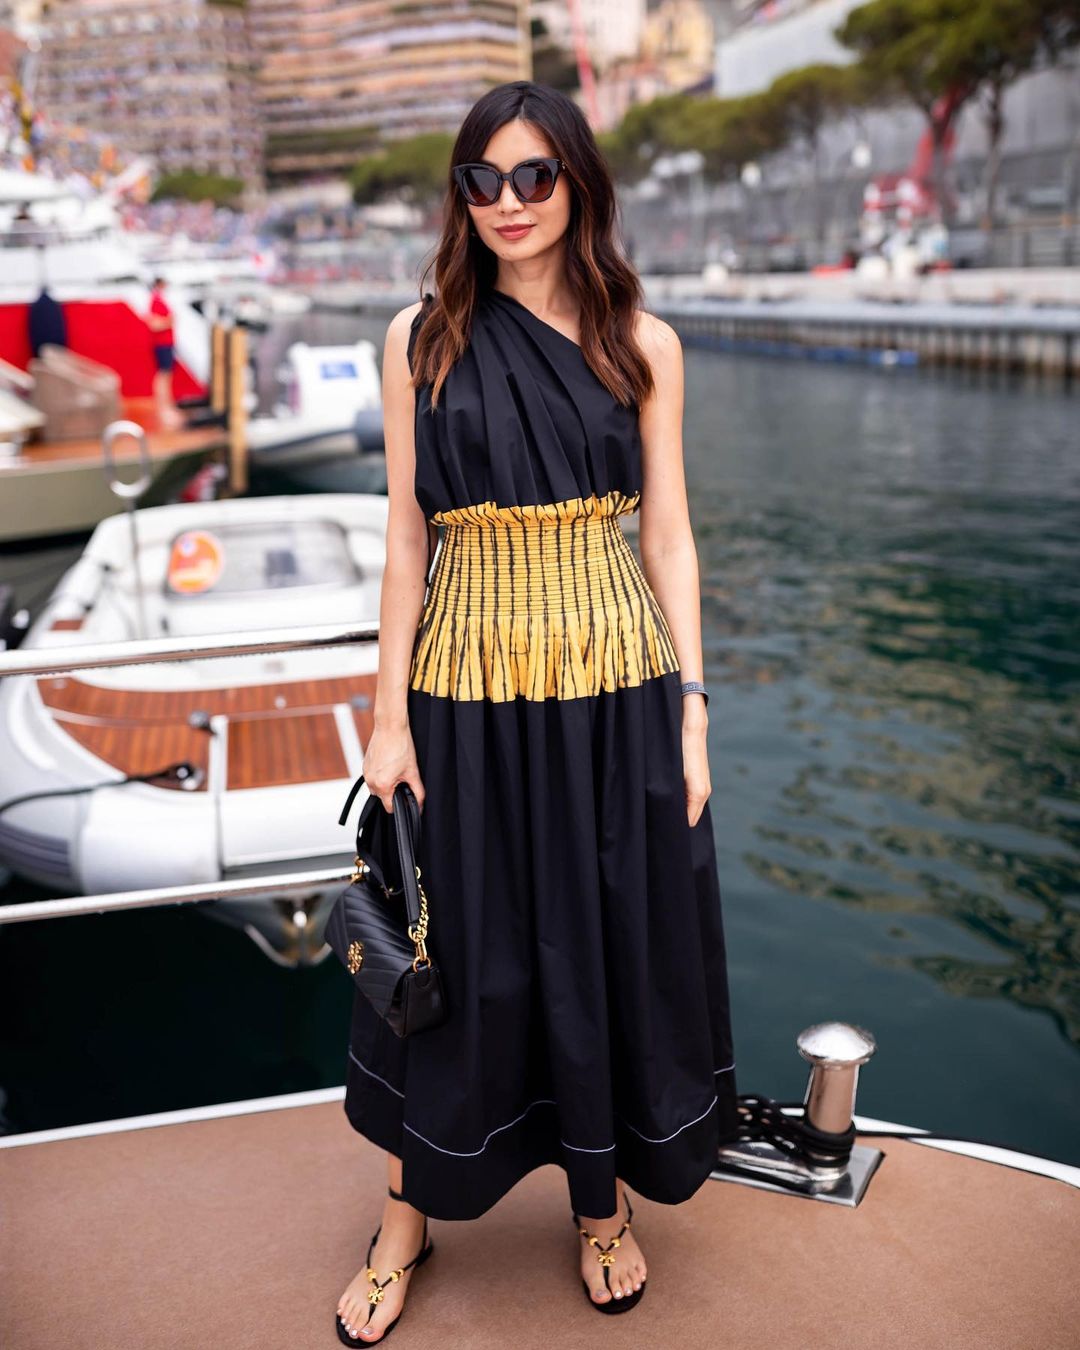 Tory Burch on X: .@gemma_chan wearing our Colorblock Stripe One